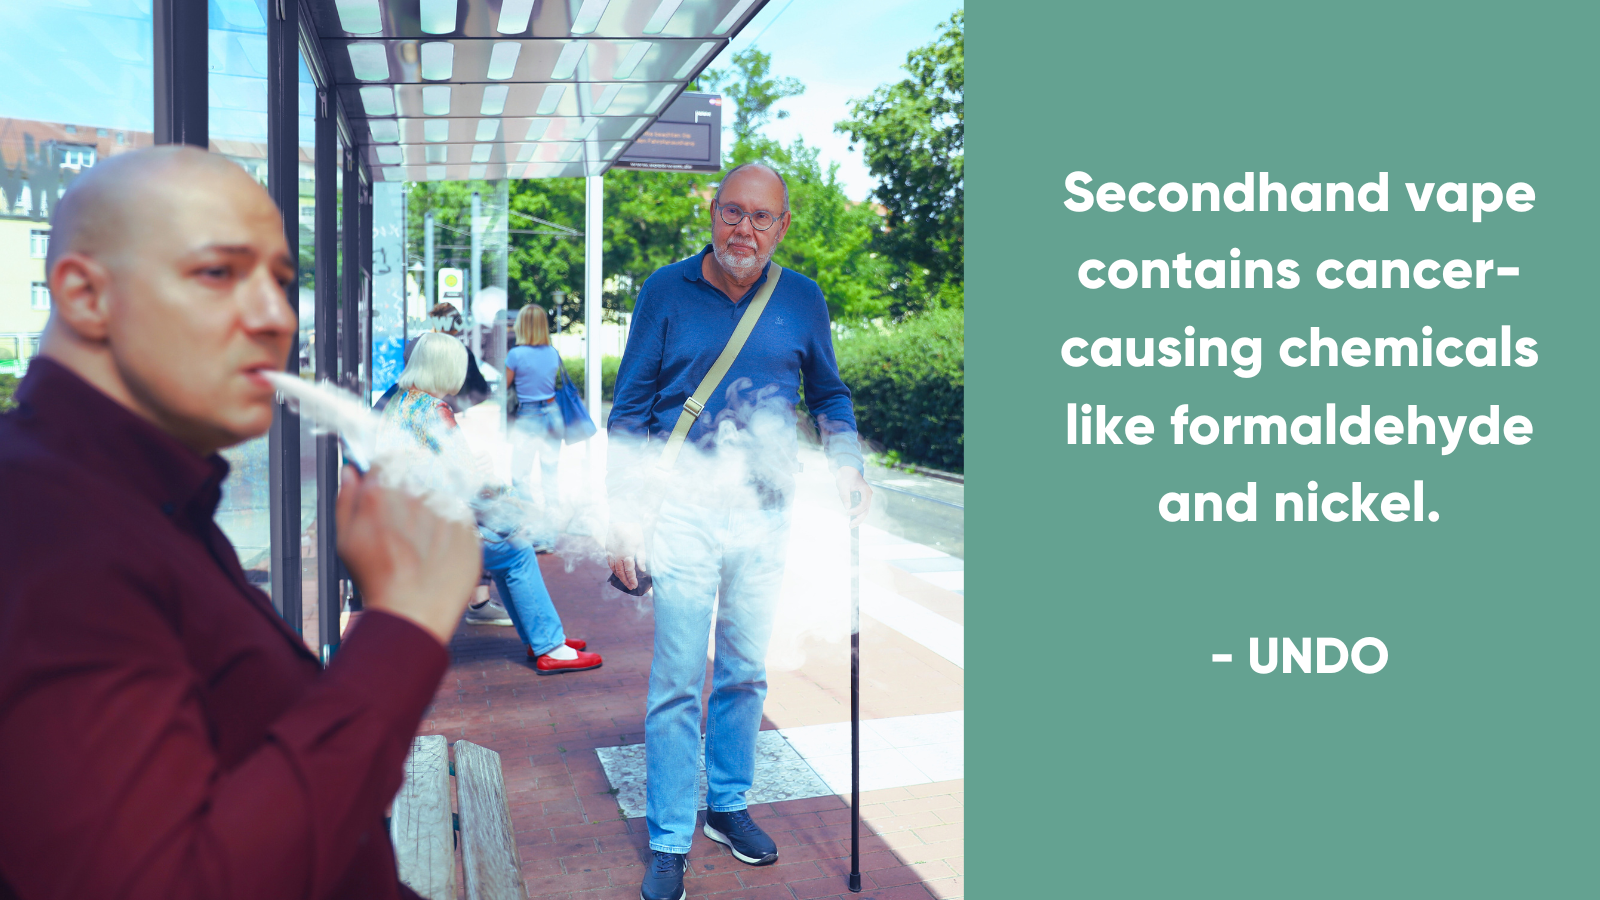 Secondhand vape contains cancer-causing chemicals like formaldehyde and nickel.